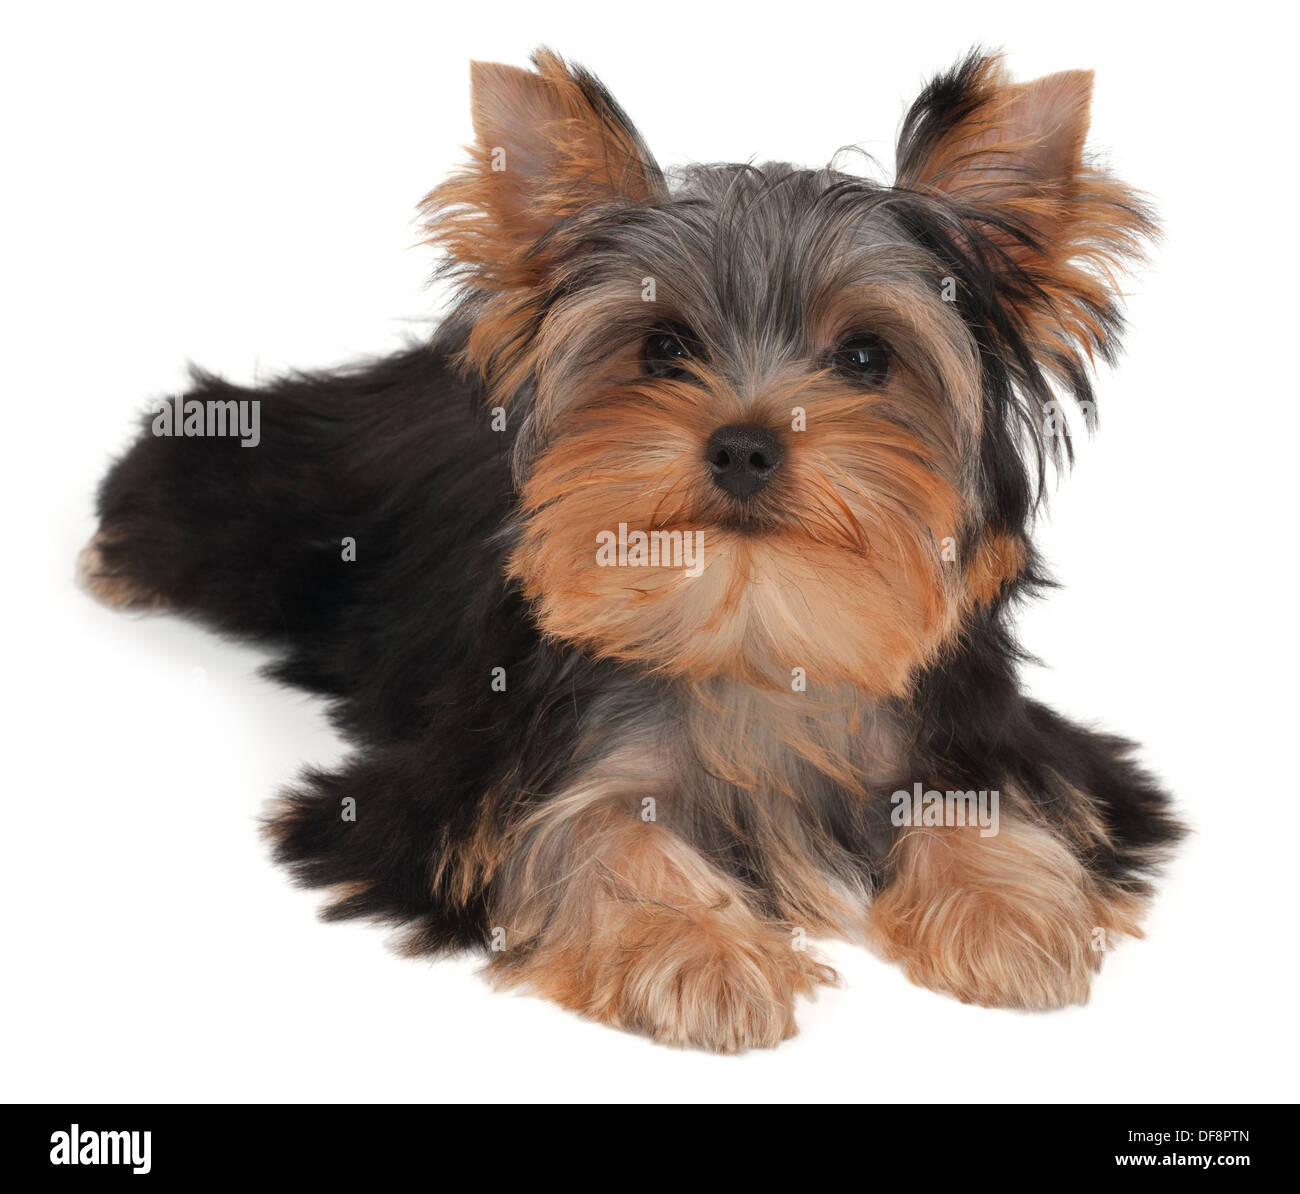 Adorable and cute puppy of the Yorkshire Terrier Stock Photo